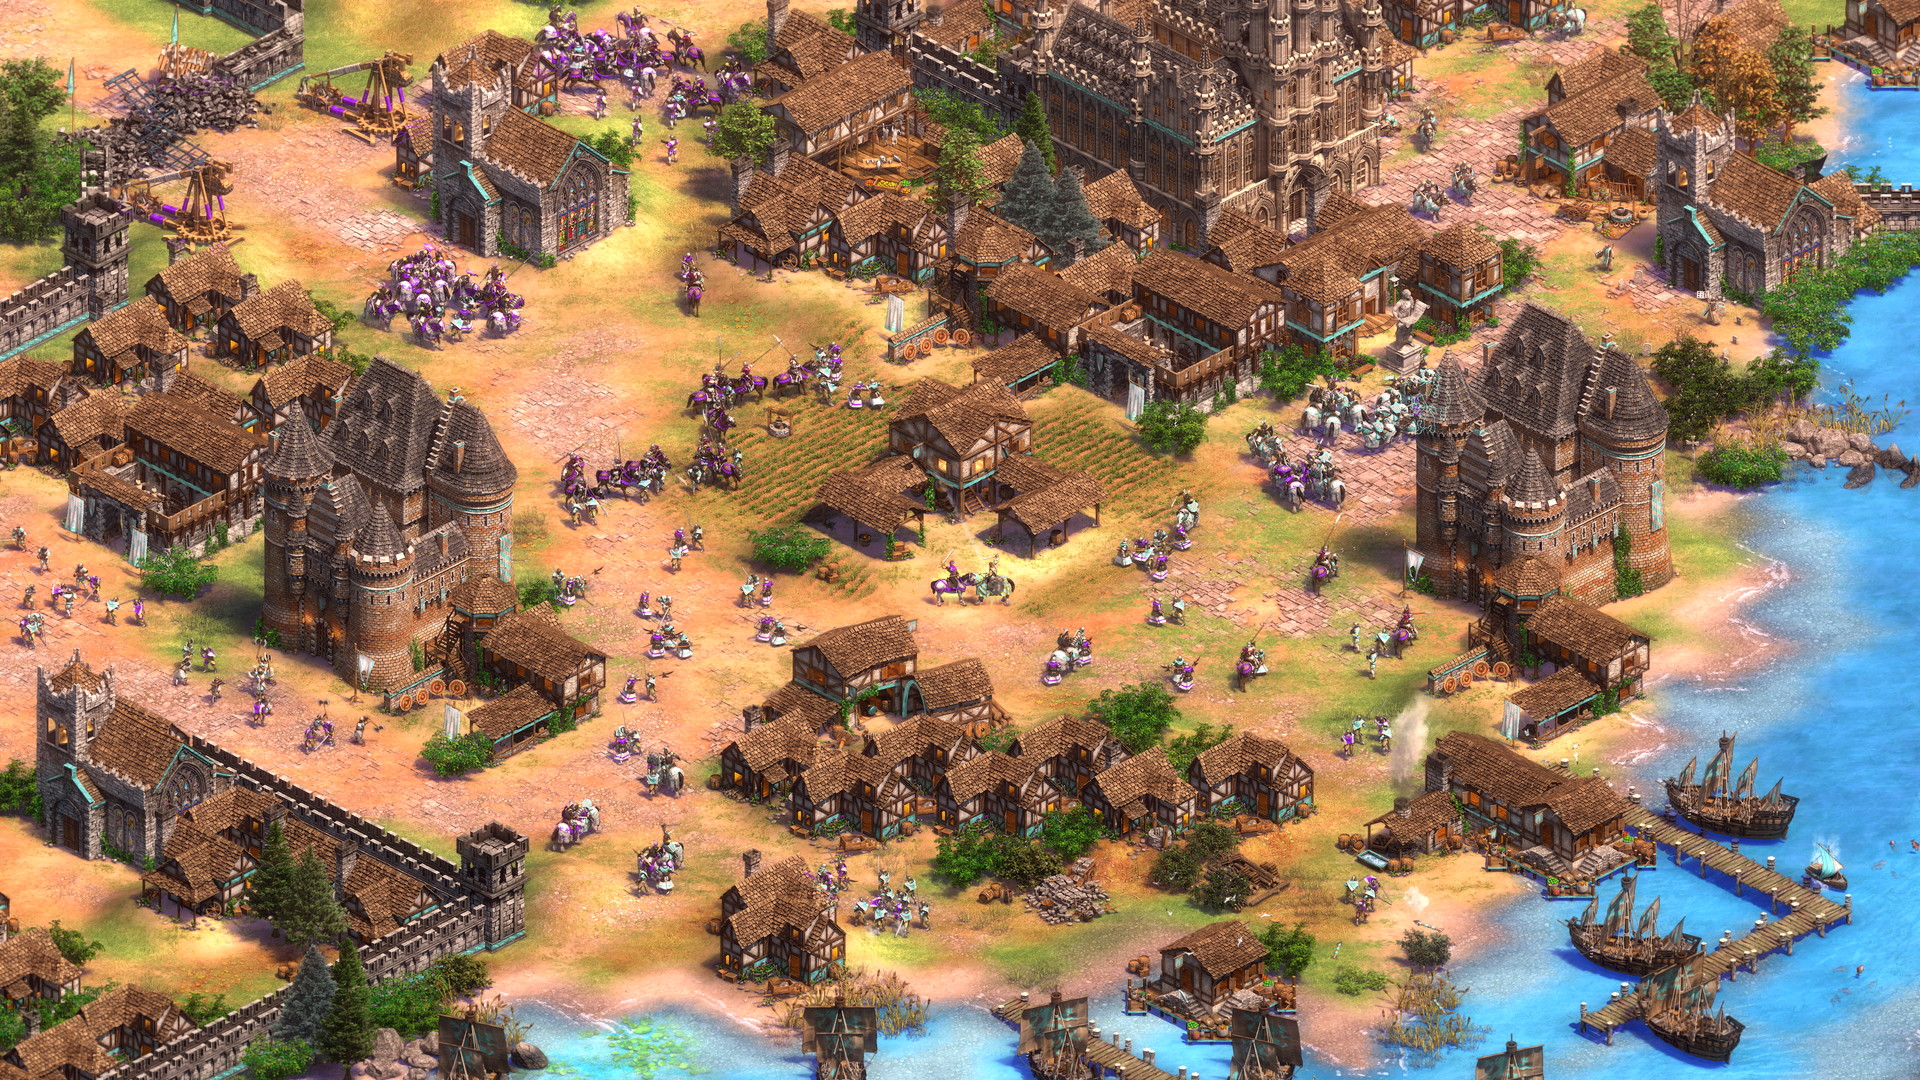 Age of Empires II: Definitive Edition - Lords of the West - screenshot 4